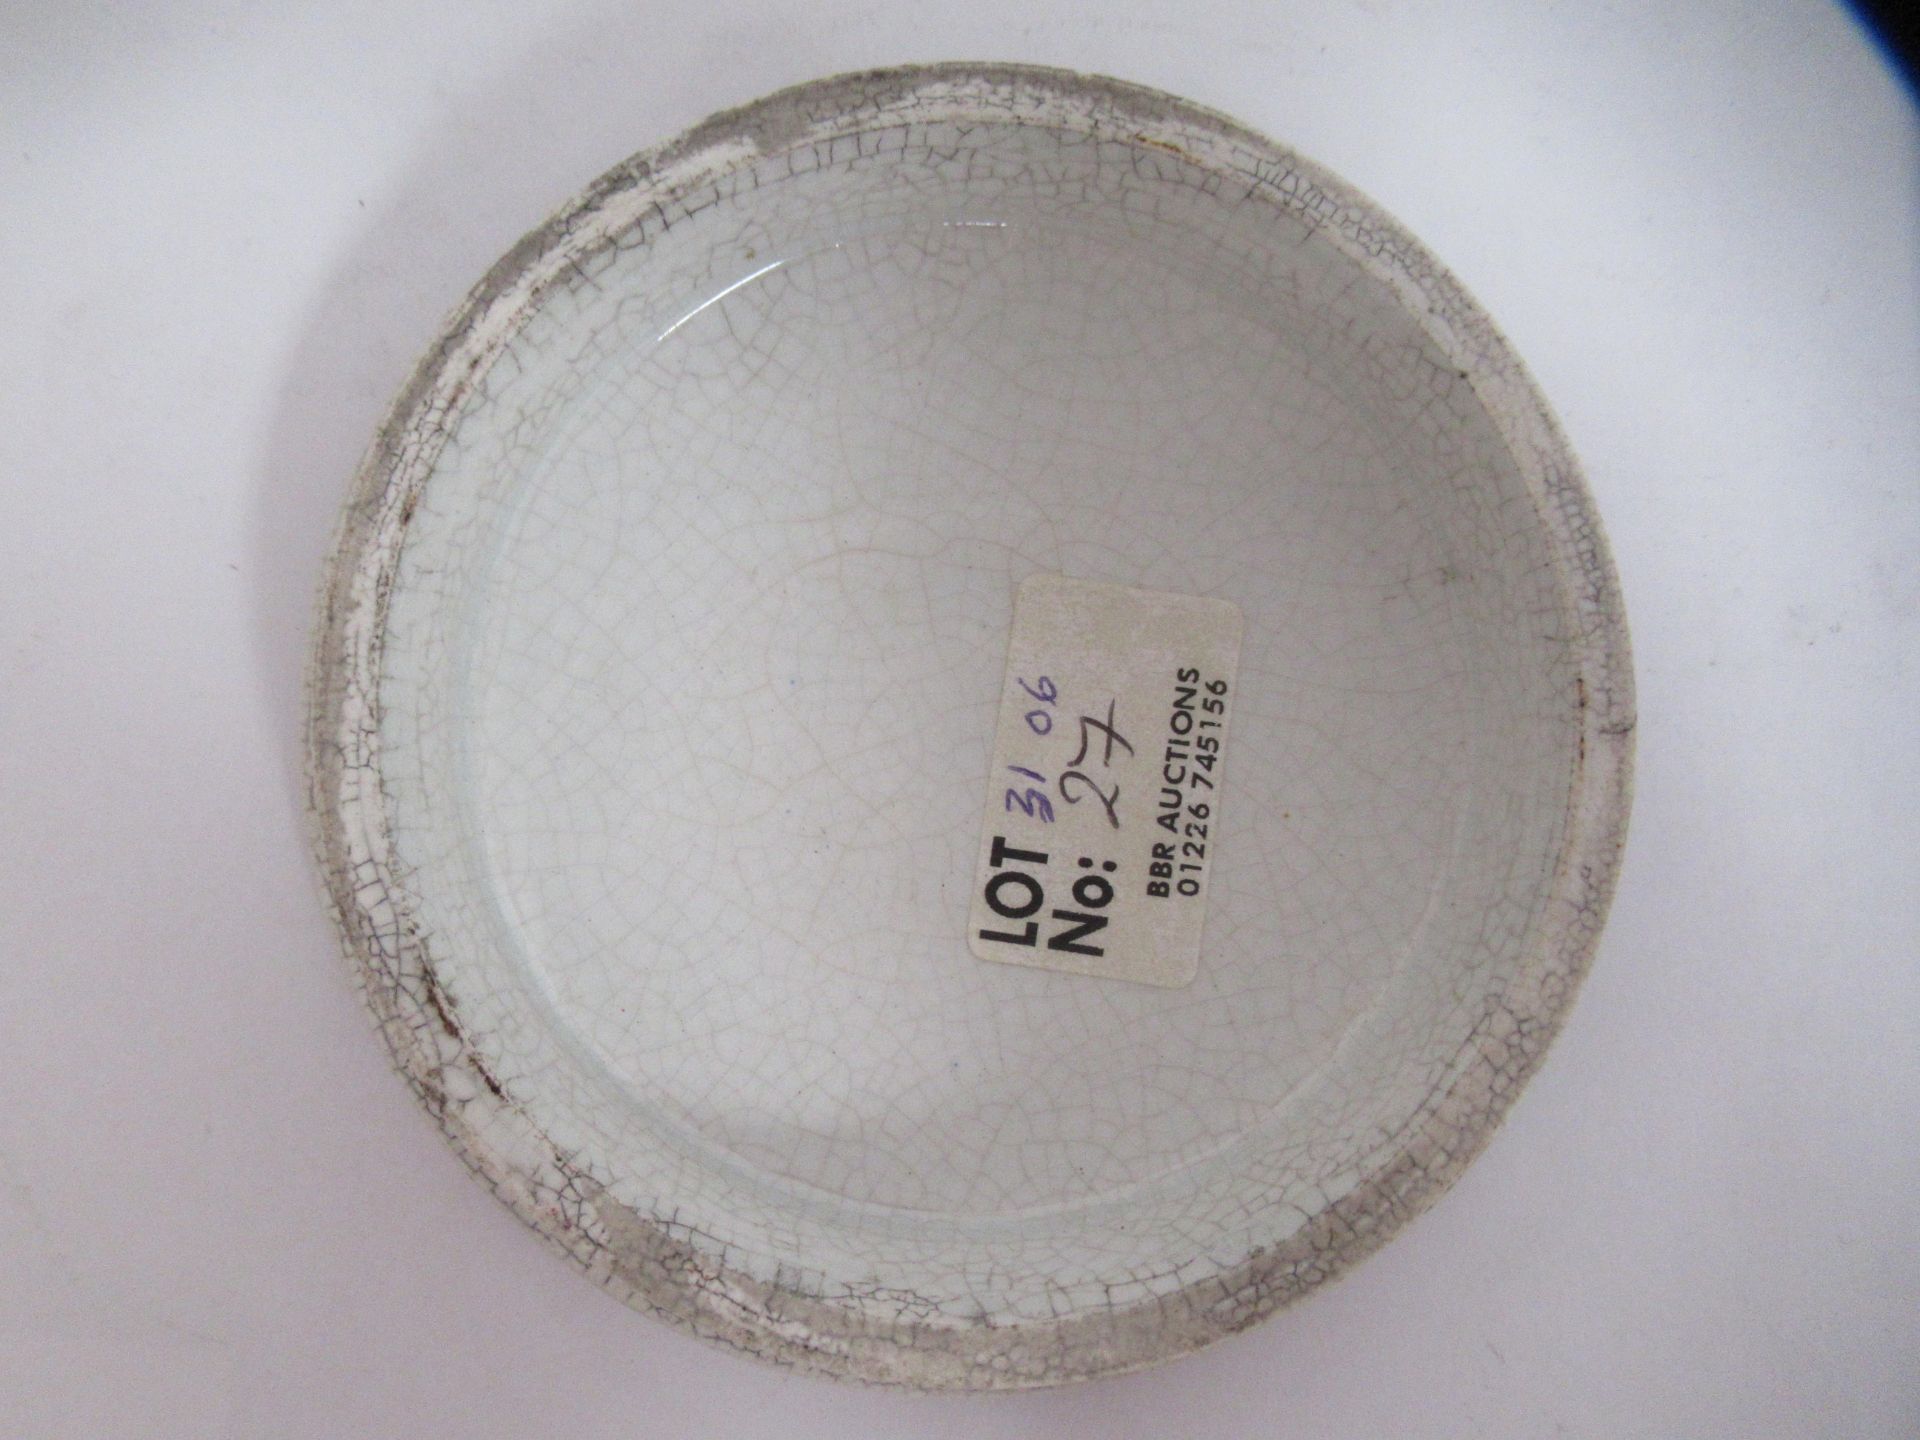 6x Prattware ceramic lids including 'Royal Harbour Ramsgate', 'The Chin-Chew River', 'Contrast', and - Image 6 of 21